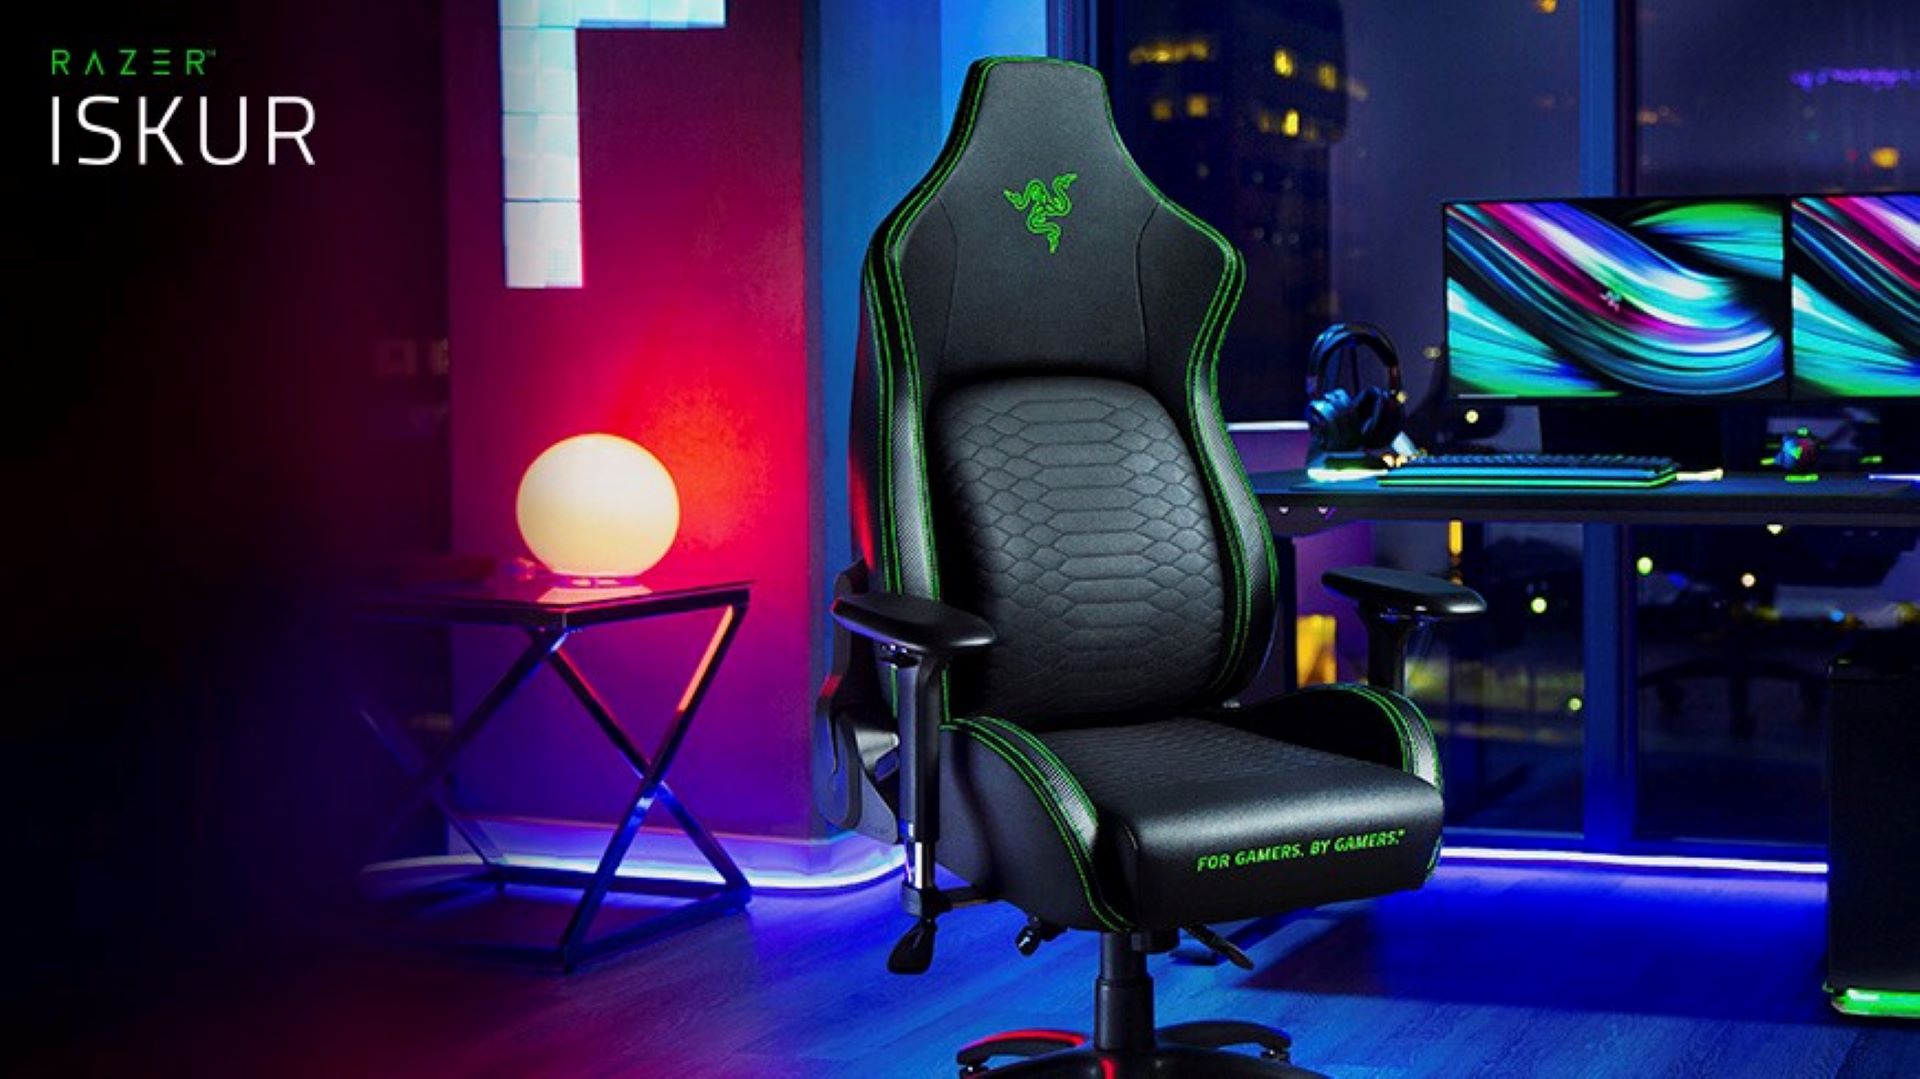 Razer gaming chair in gaming rook backdrop